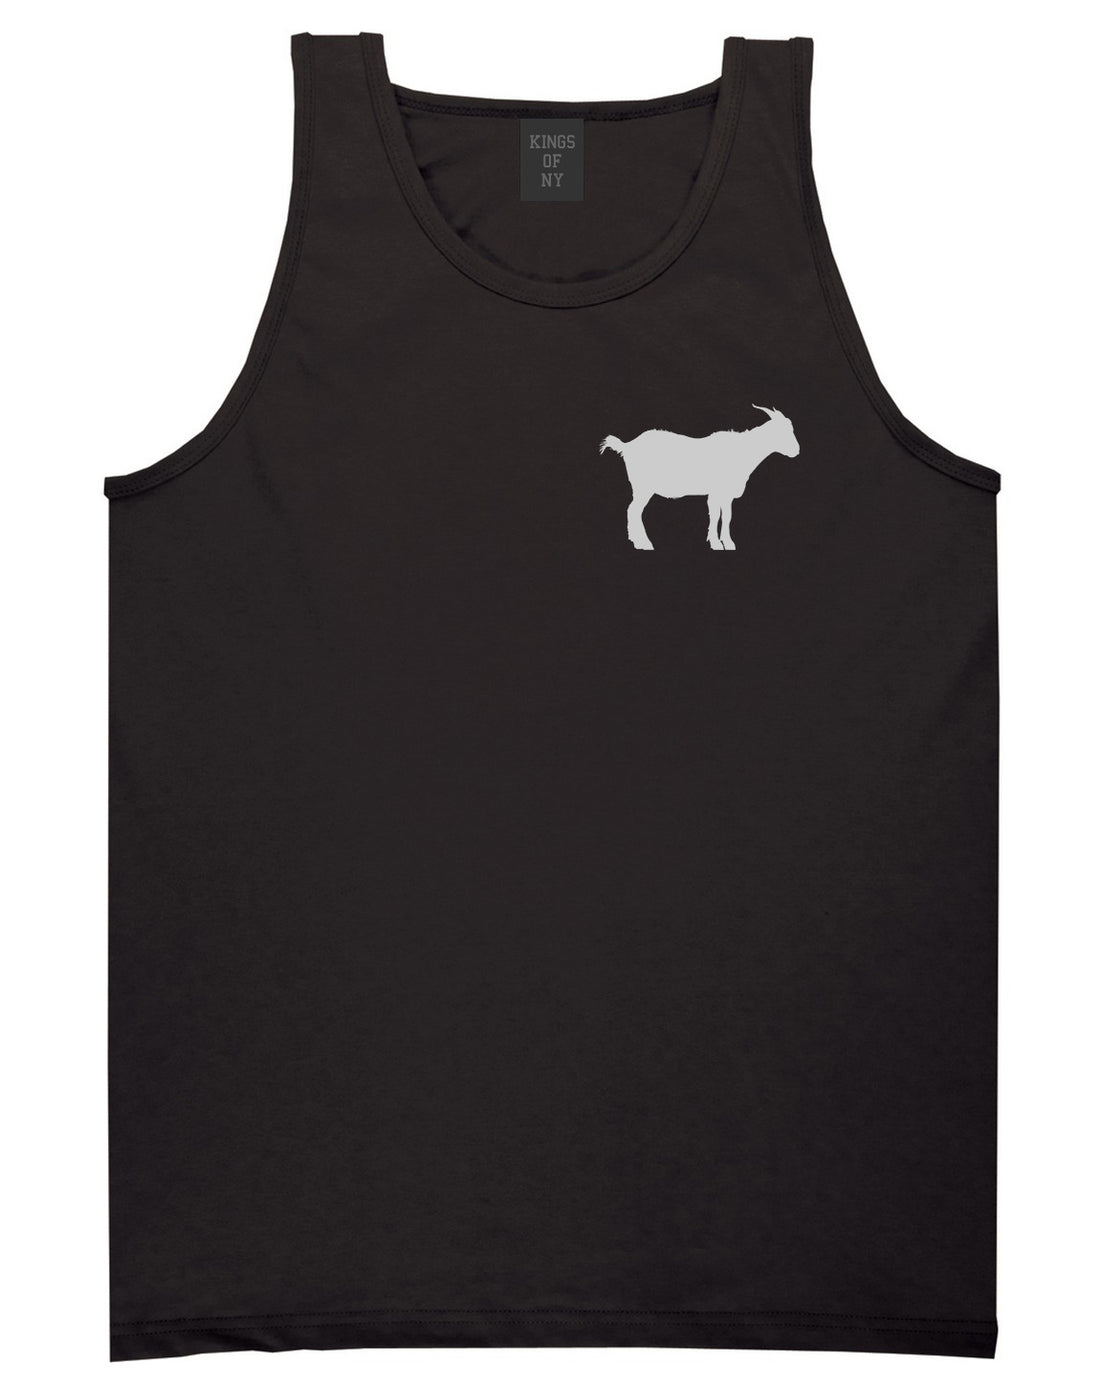 Goat Animal Chest Mens Black Tank Top Shirt by KINGS OF NY